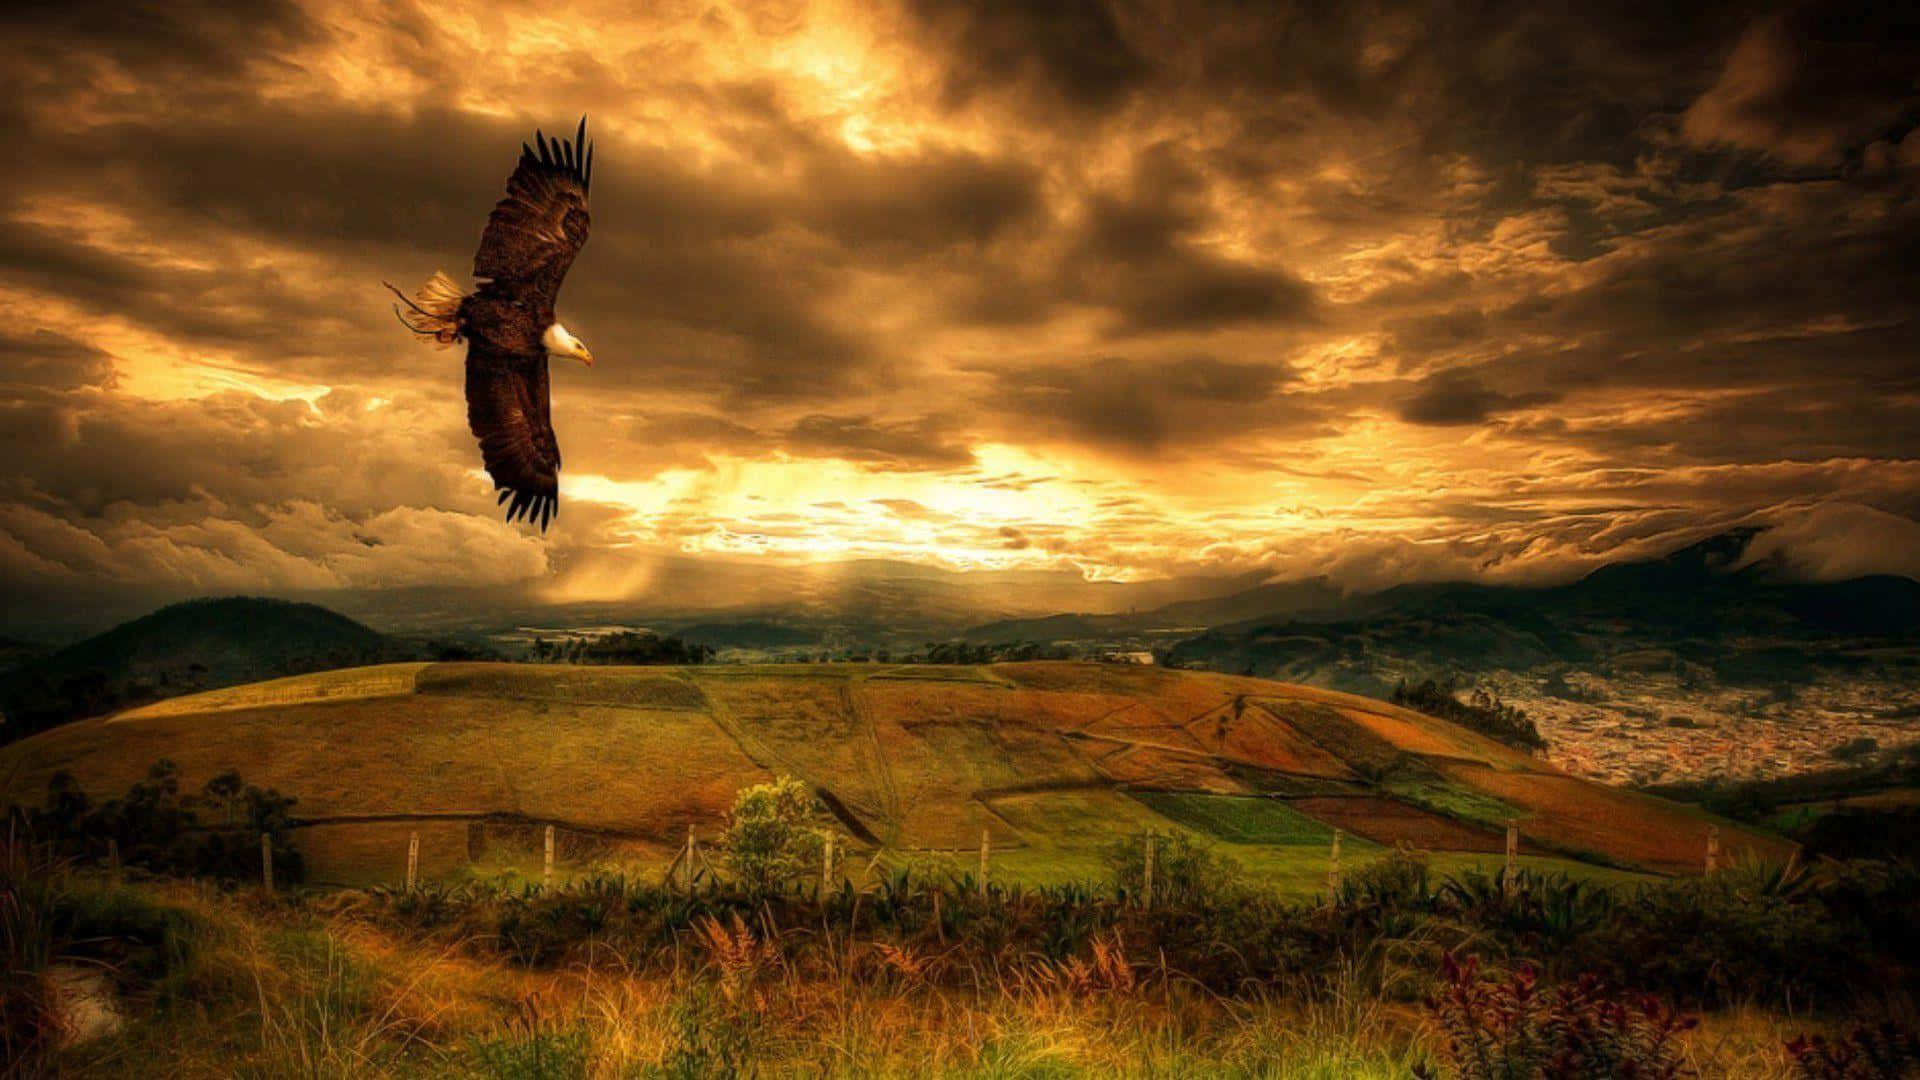 "Soar the Skies with the Noble Eagle"